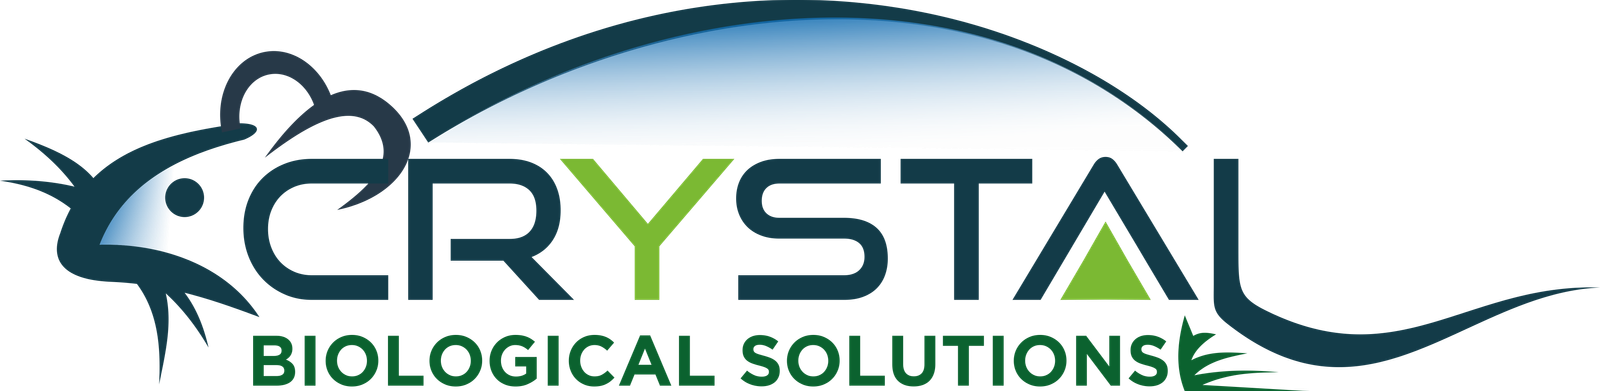 Crystal Biological Solutions I Leading Preclinical Contract Research Organization and Laboratory